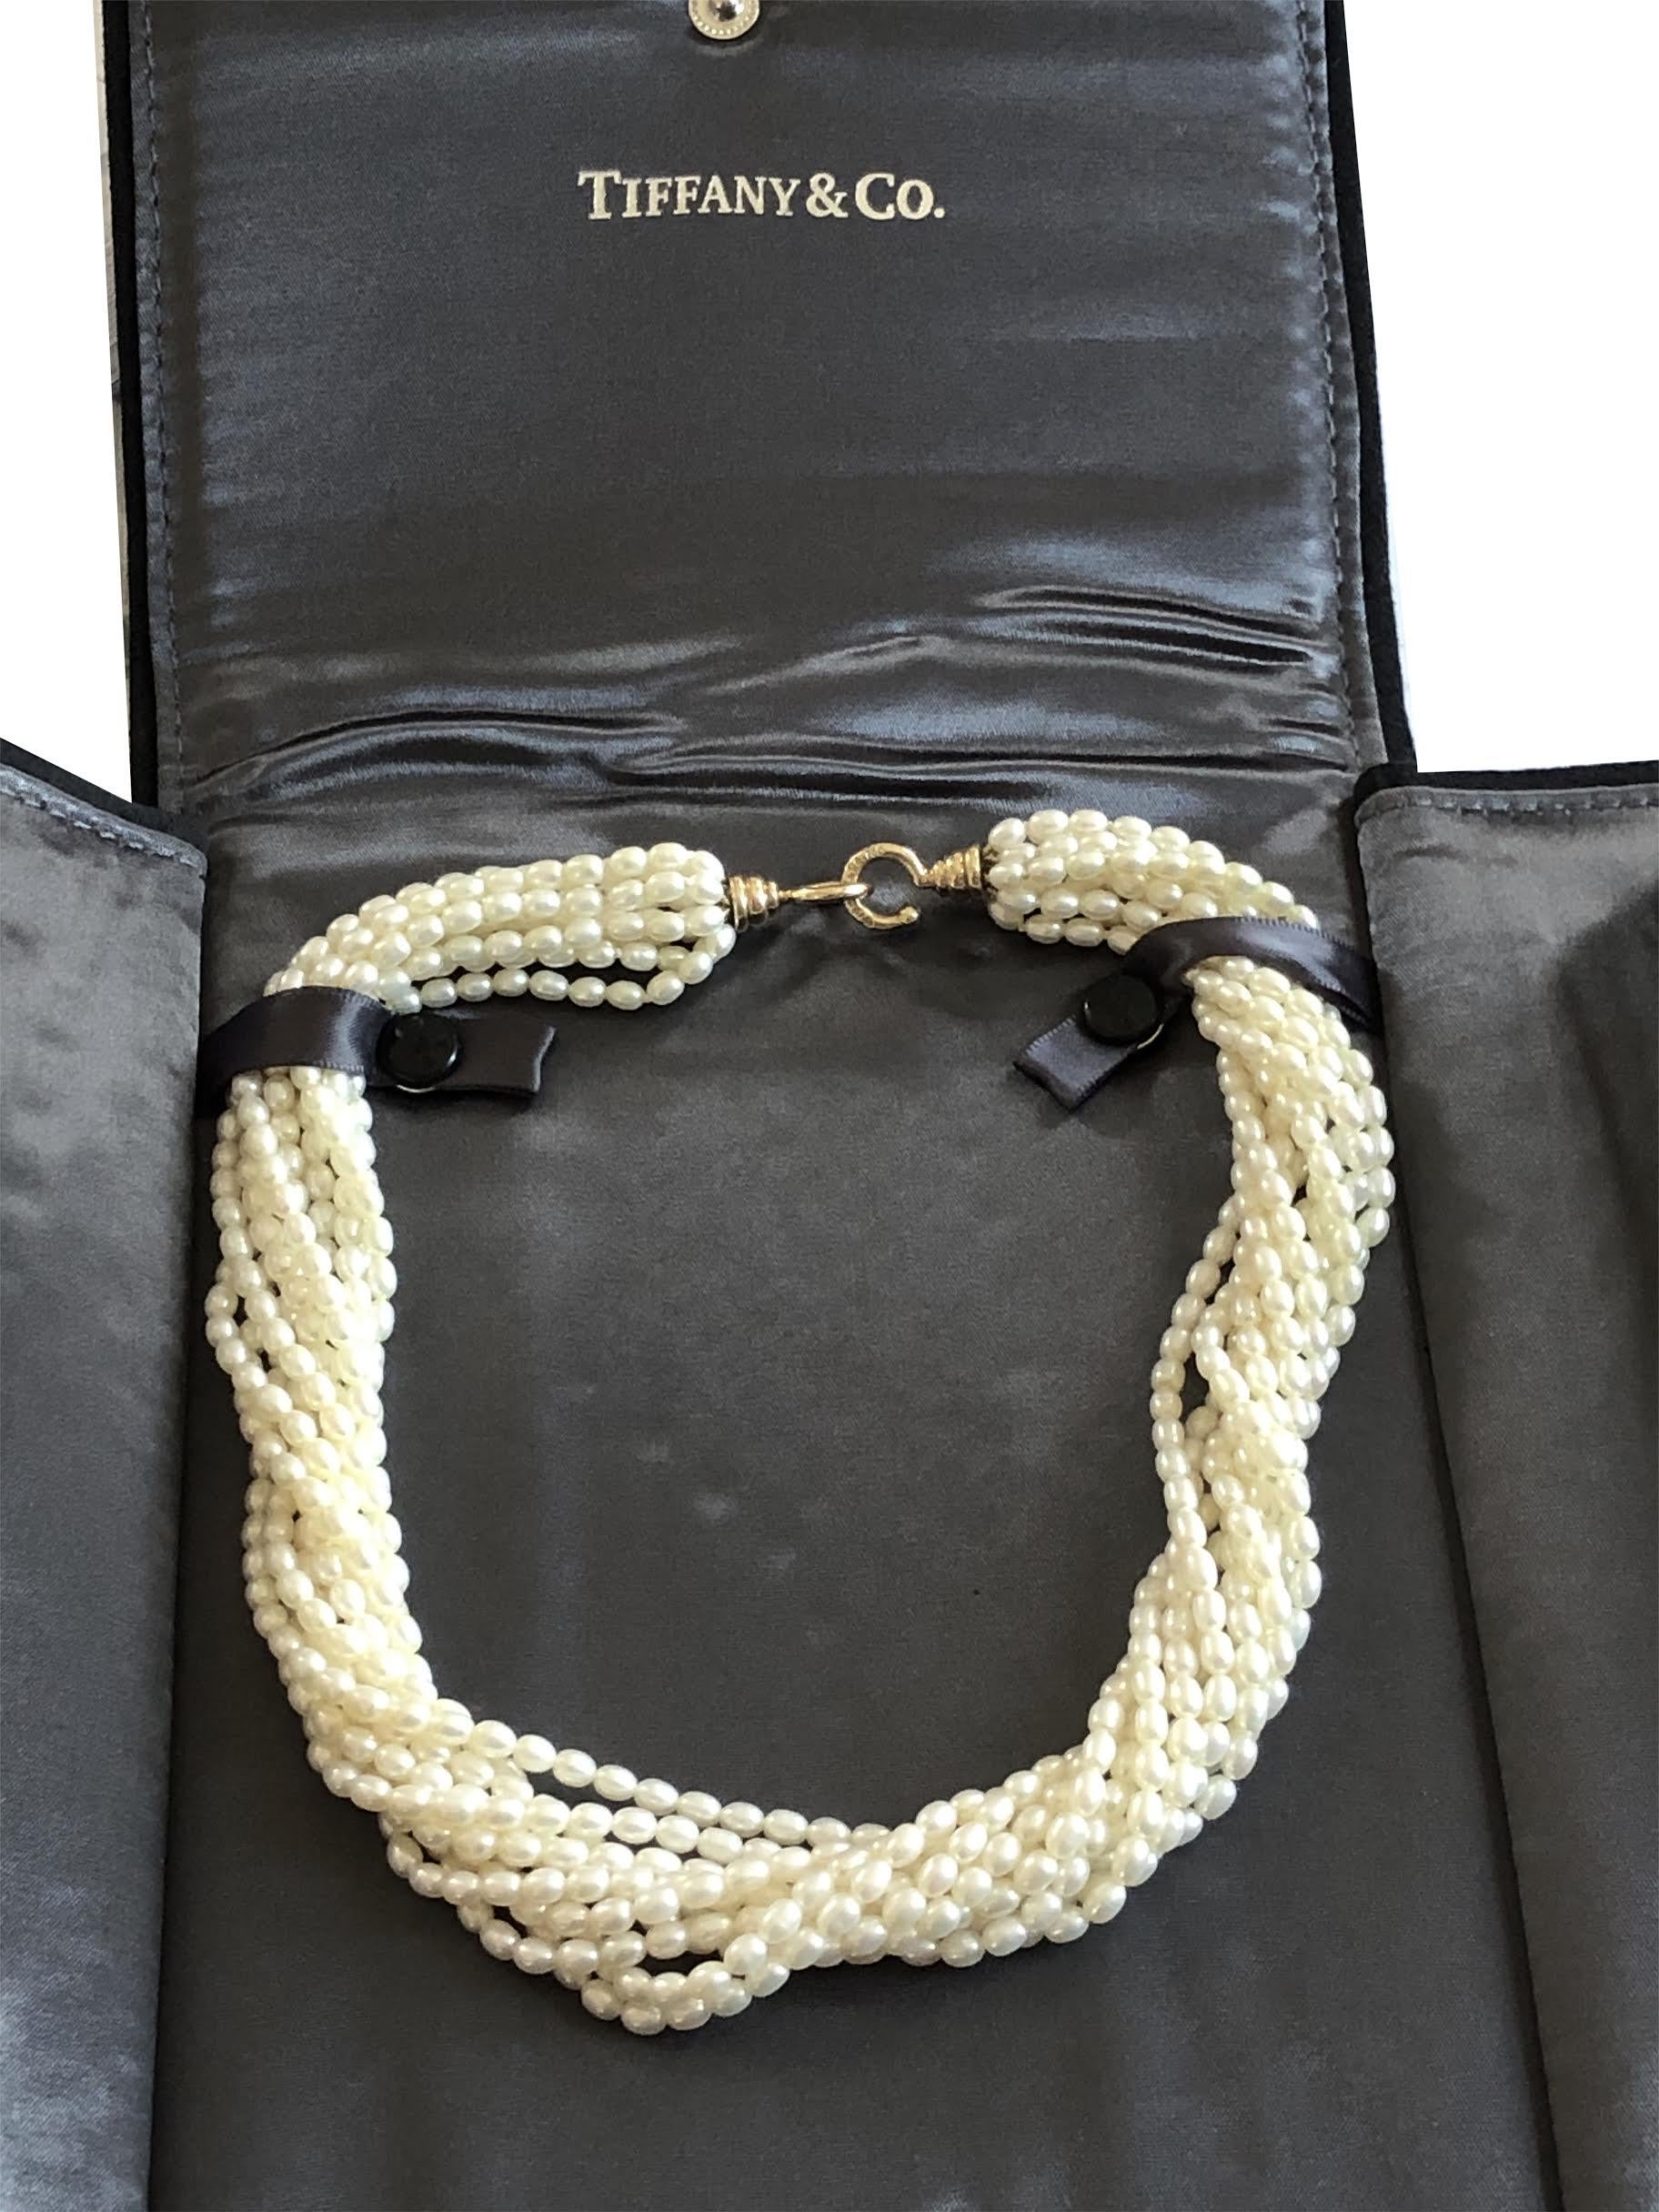 Circa 1980s Paloma Picasso for Tiffany & Company Pearl Torsade Necklace, comprised of 10 strands of Fresh water pearls measuring 4 X 3 M.M. all having a beautifully matched smooth unblemished surface and Fine White Luster. 18K Yellow Gold Hook